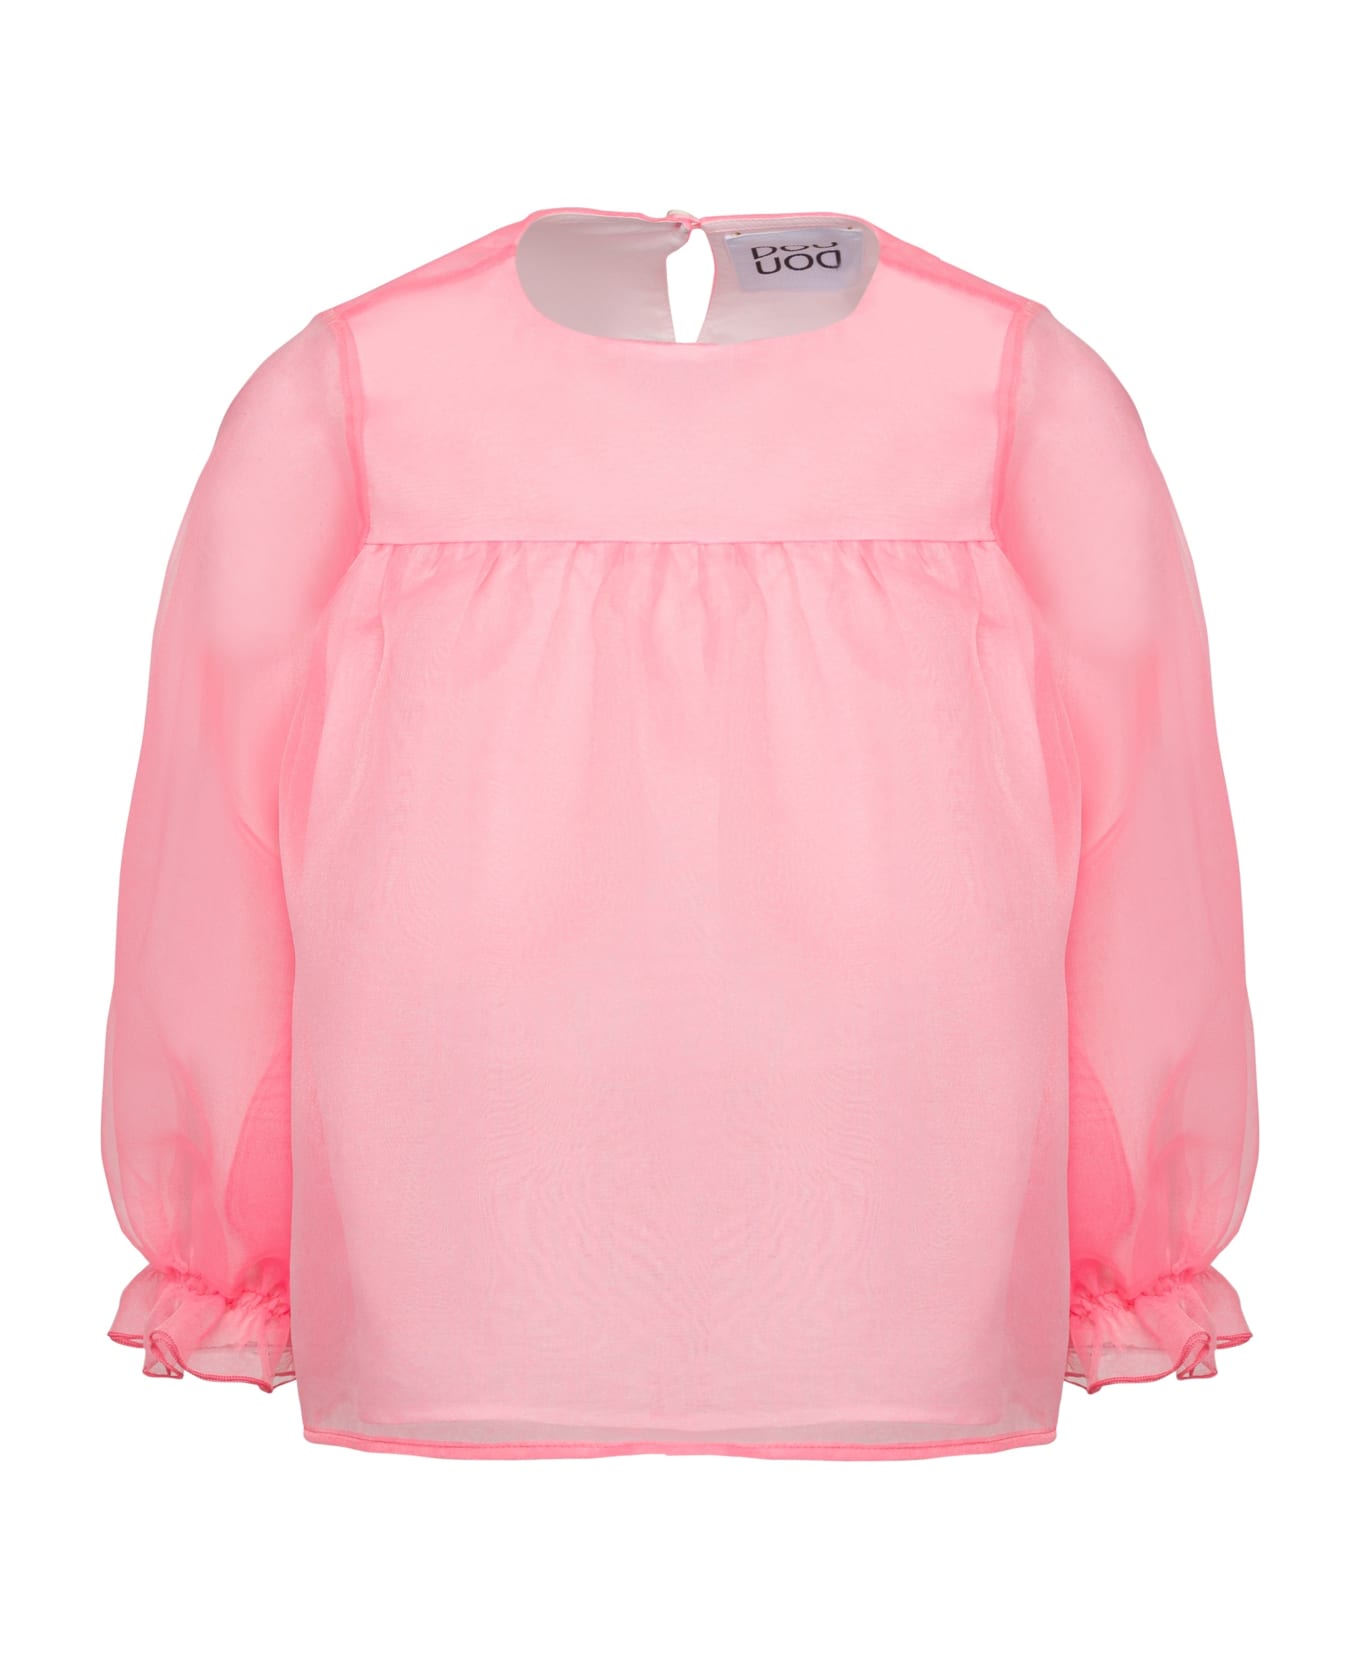 Douuod Blouse - Pink シャツ